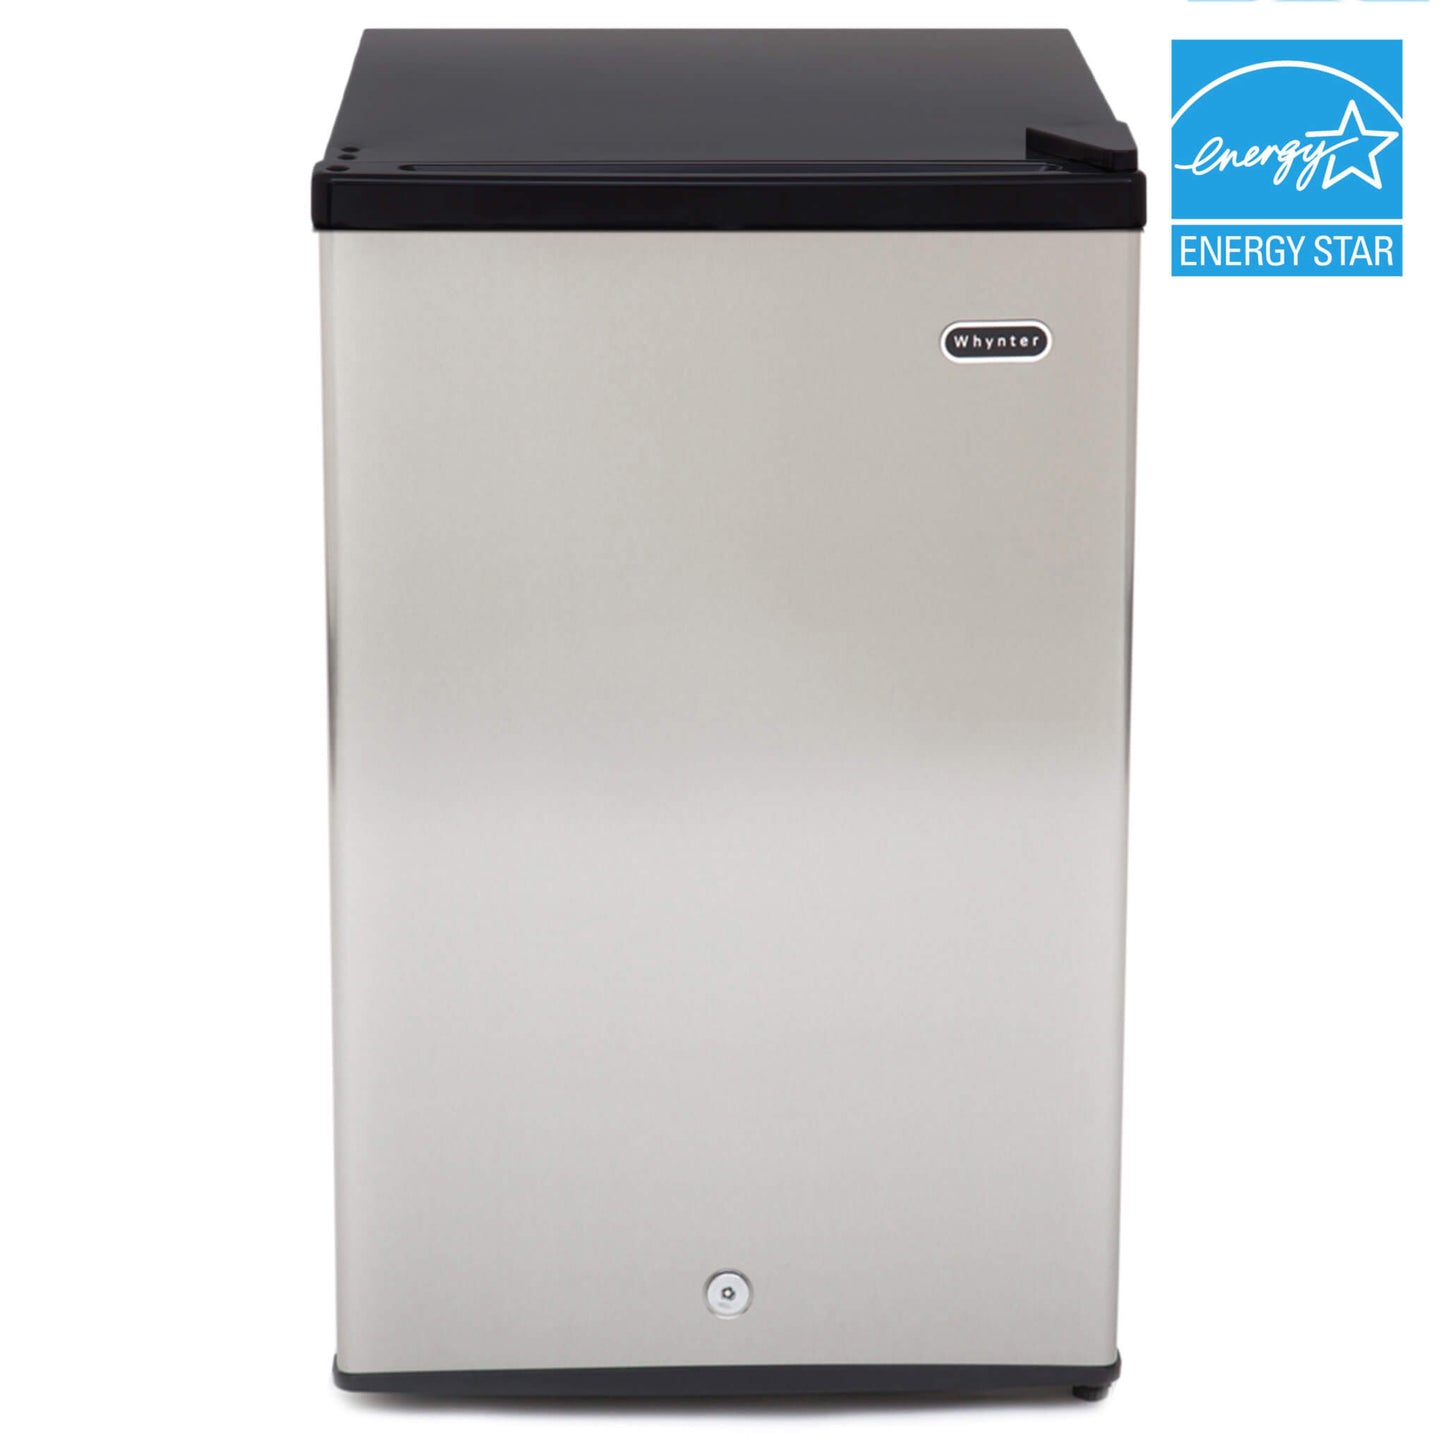 Whynter 3.0 cu. ft. Energy Star Upright Freezer with Lock – Stainless Steel - CUF-301SS